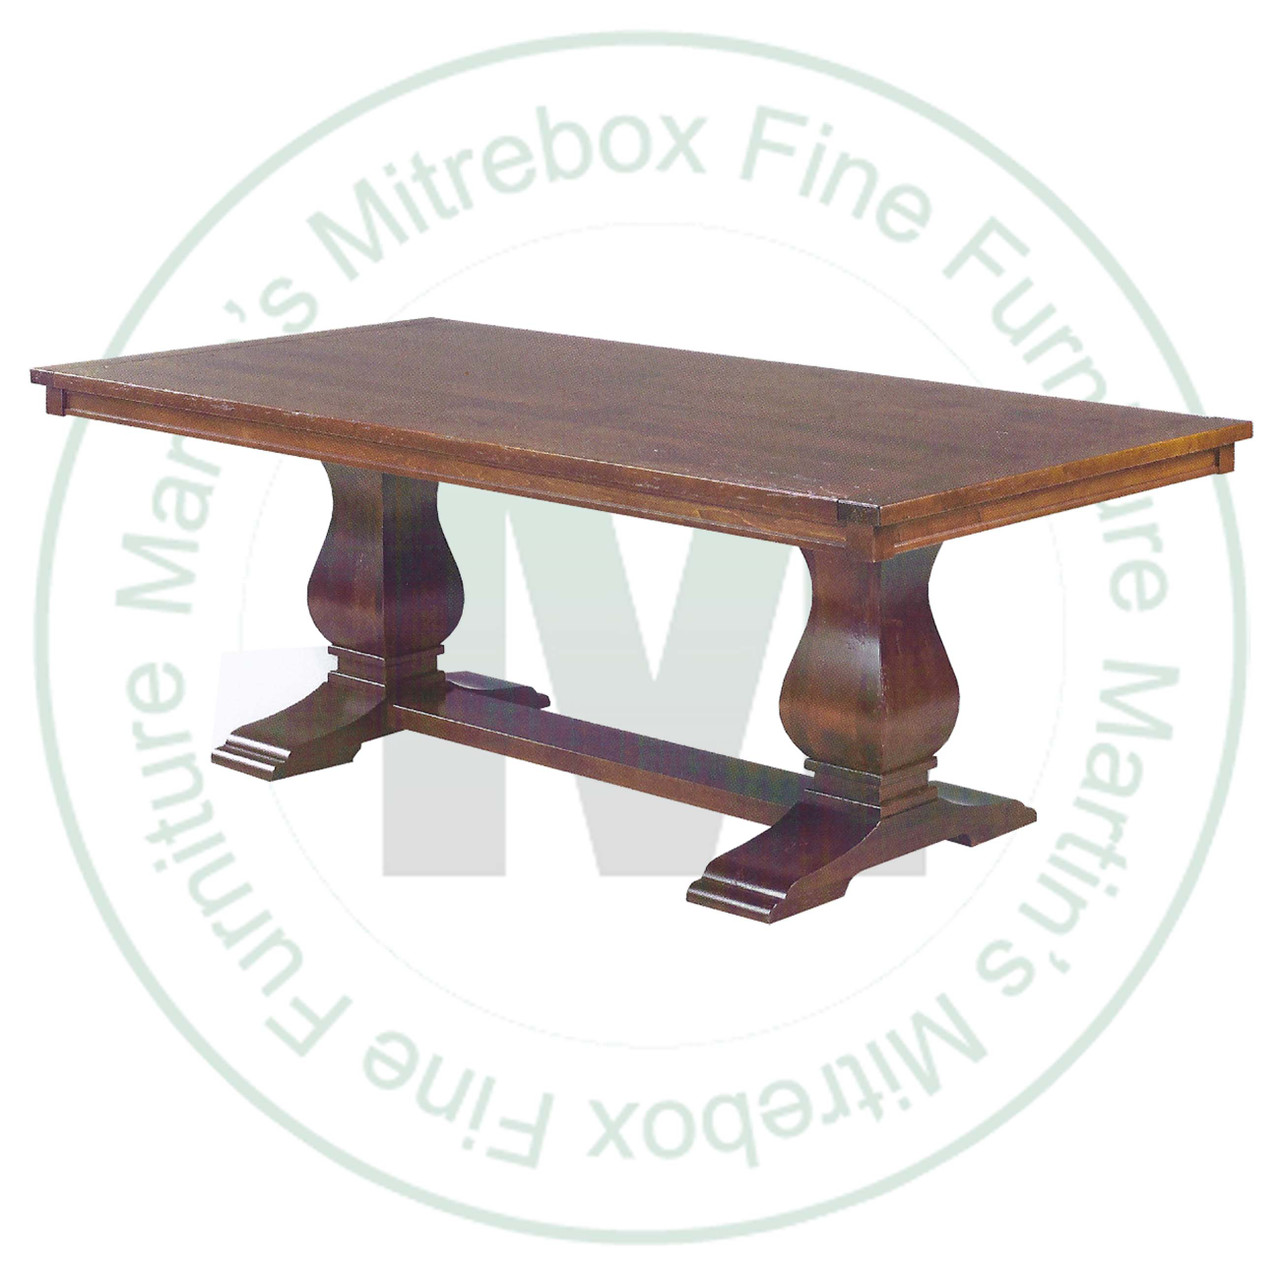 Maple Socrates Solid Top Pedestal Table 48''D x 84''W x 30''H And 2 - 16'' Extensions. Table Has 1.25'' Thick Top